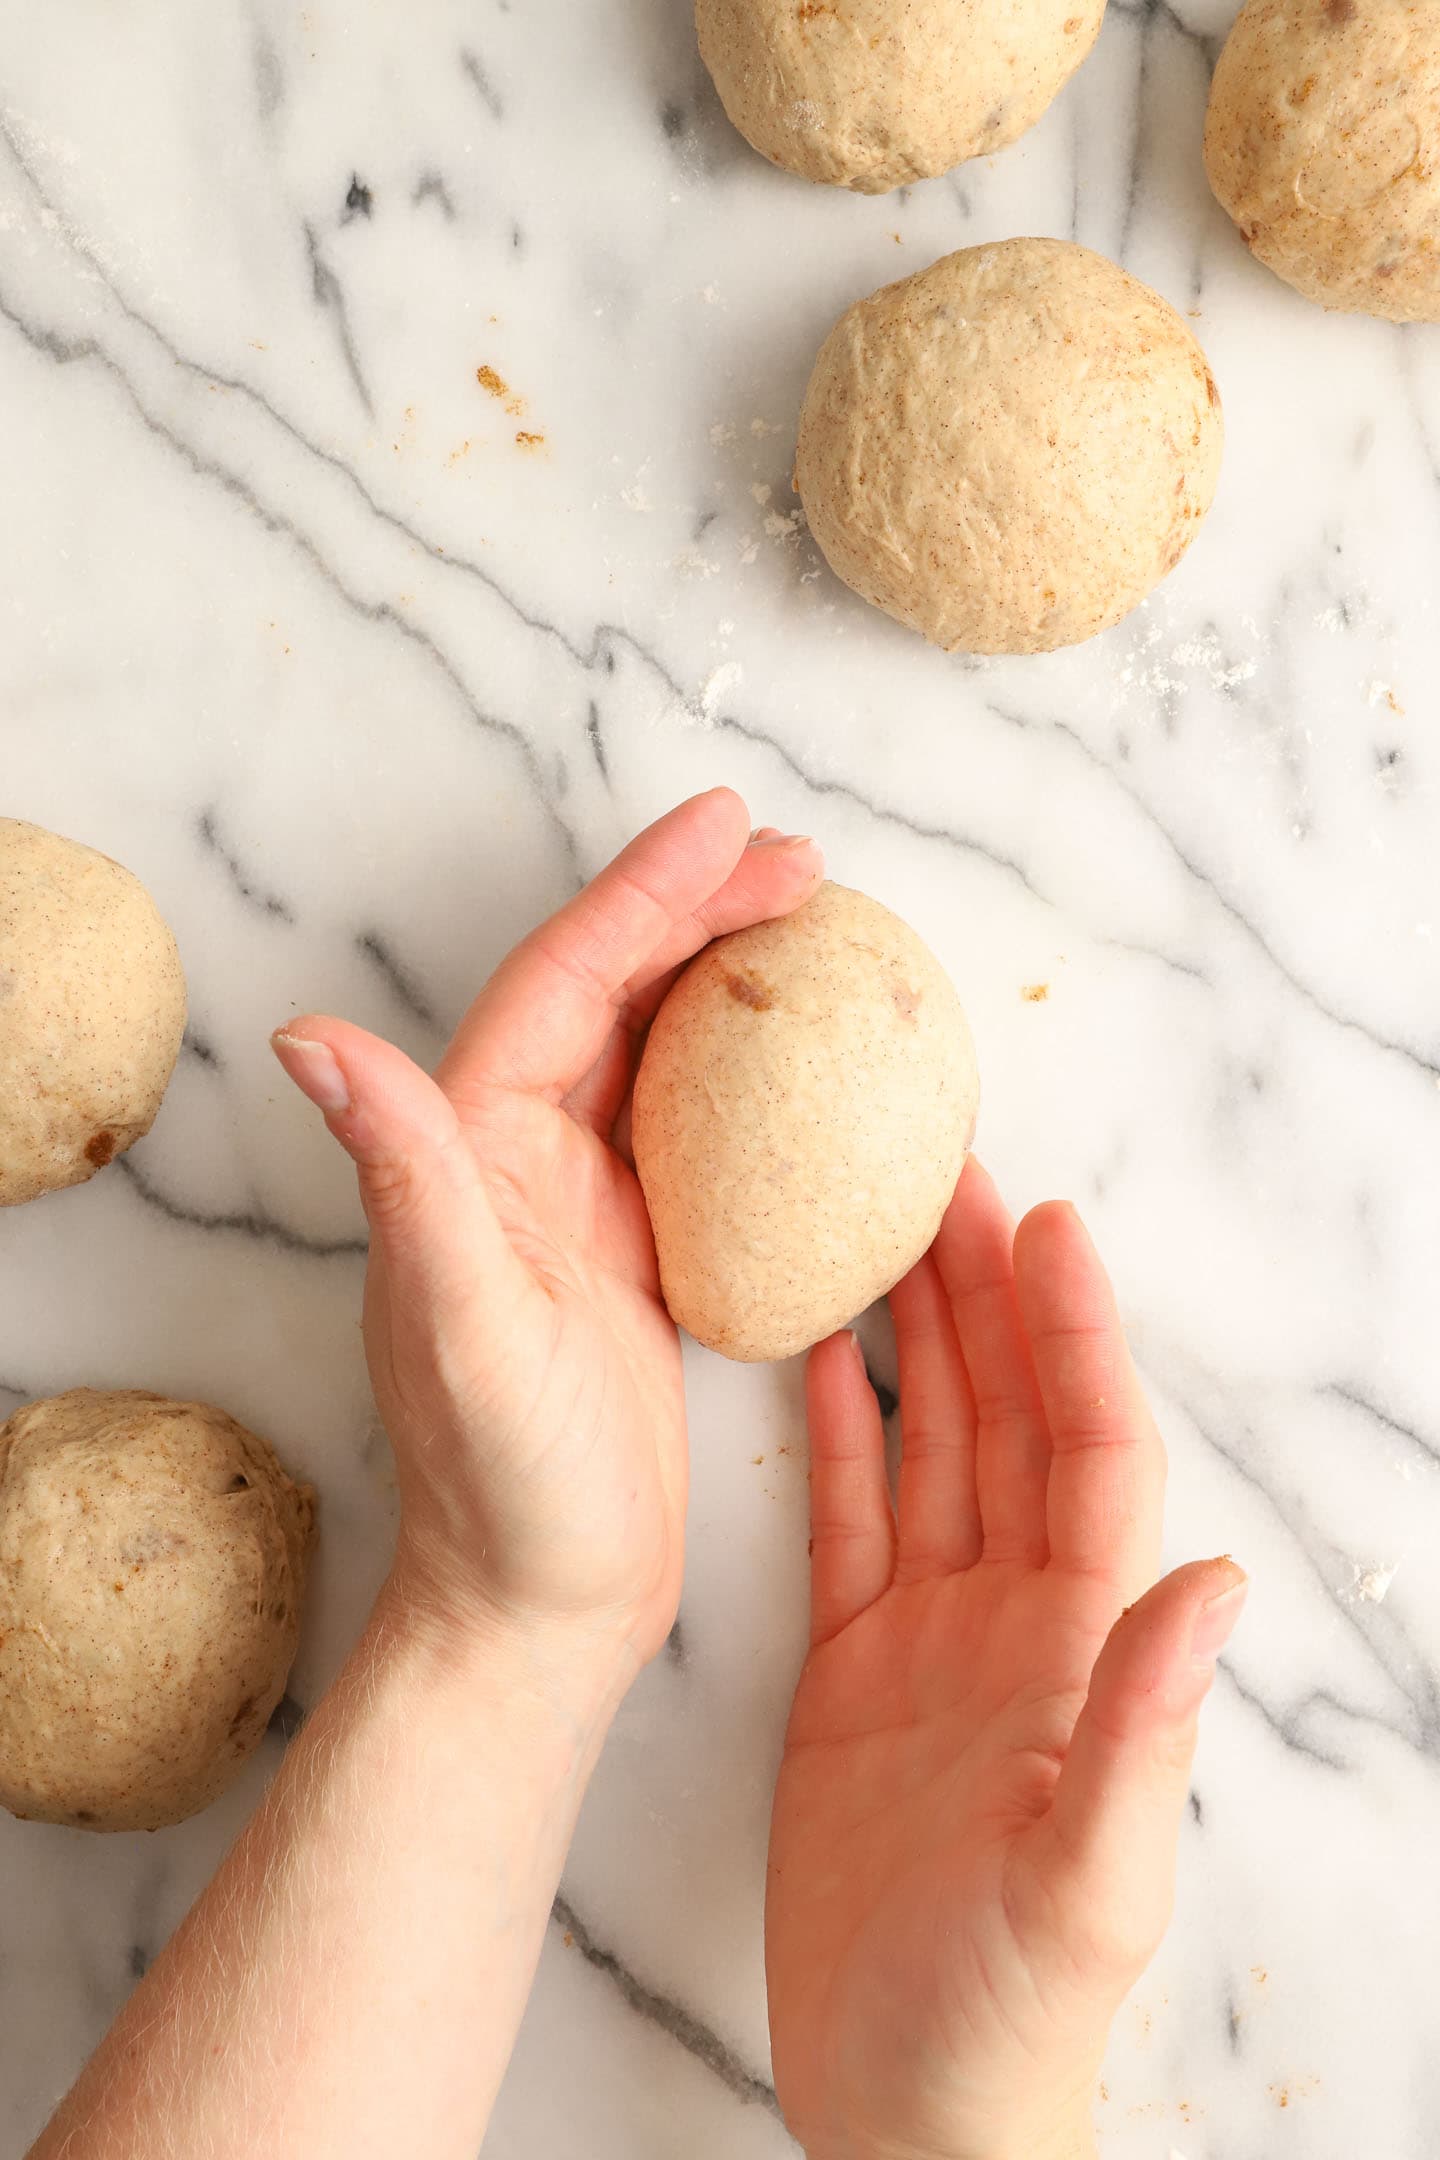 two hands demonstrating how to form a dough ball shape